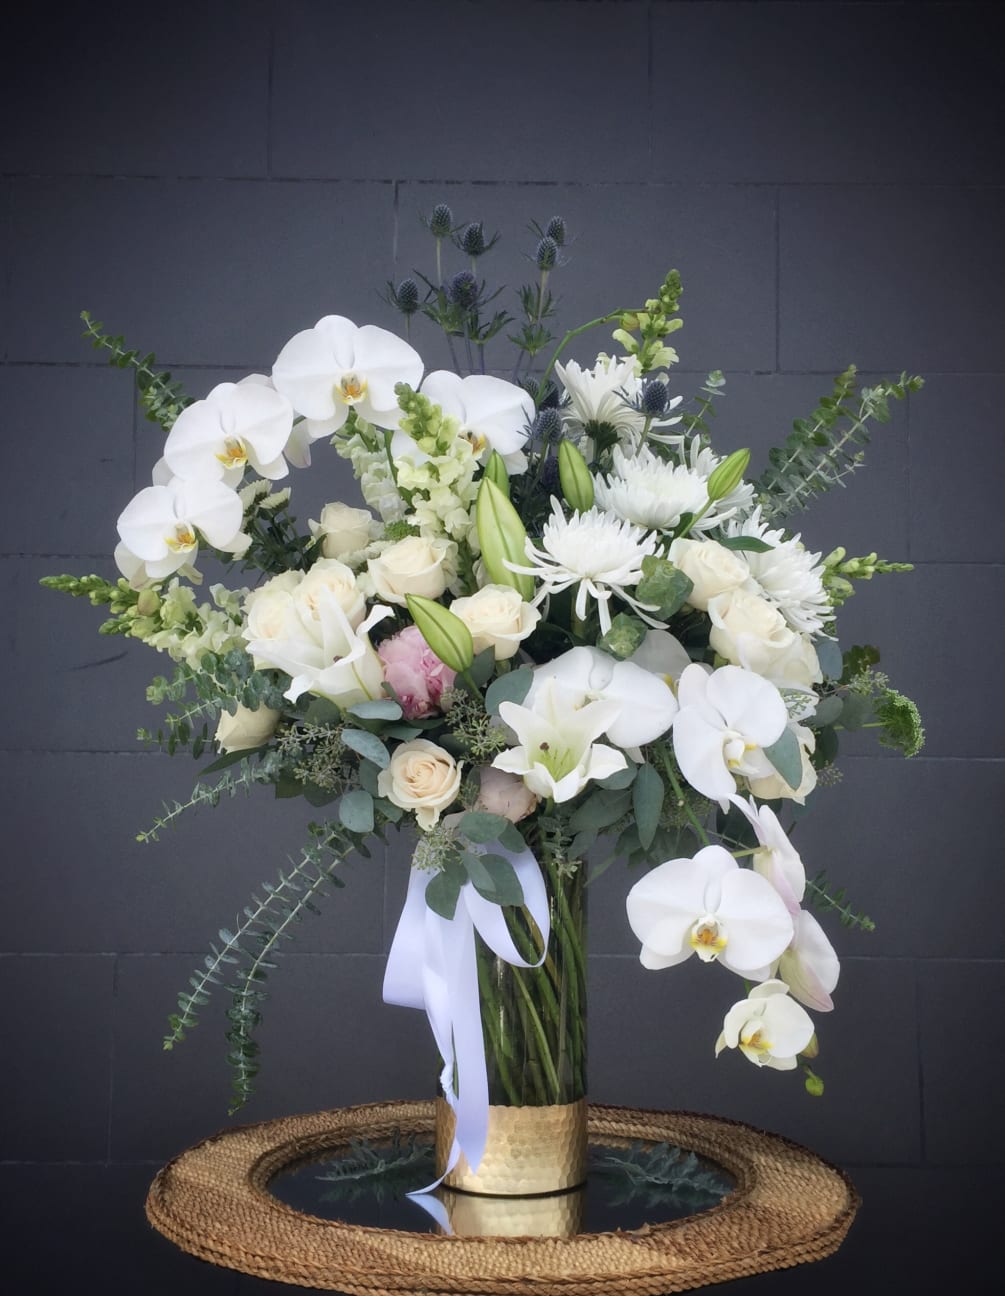 Elegant white including all premium flowers and accents in a tall glass